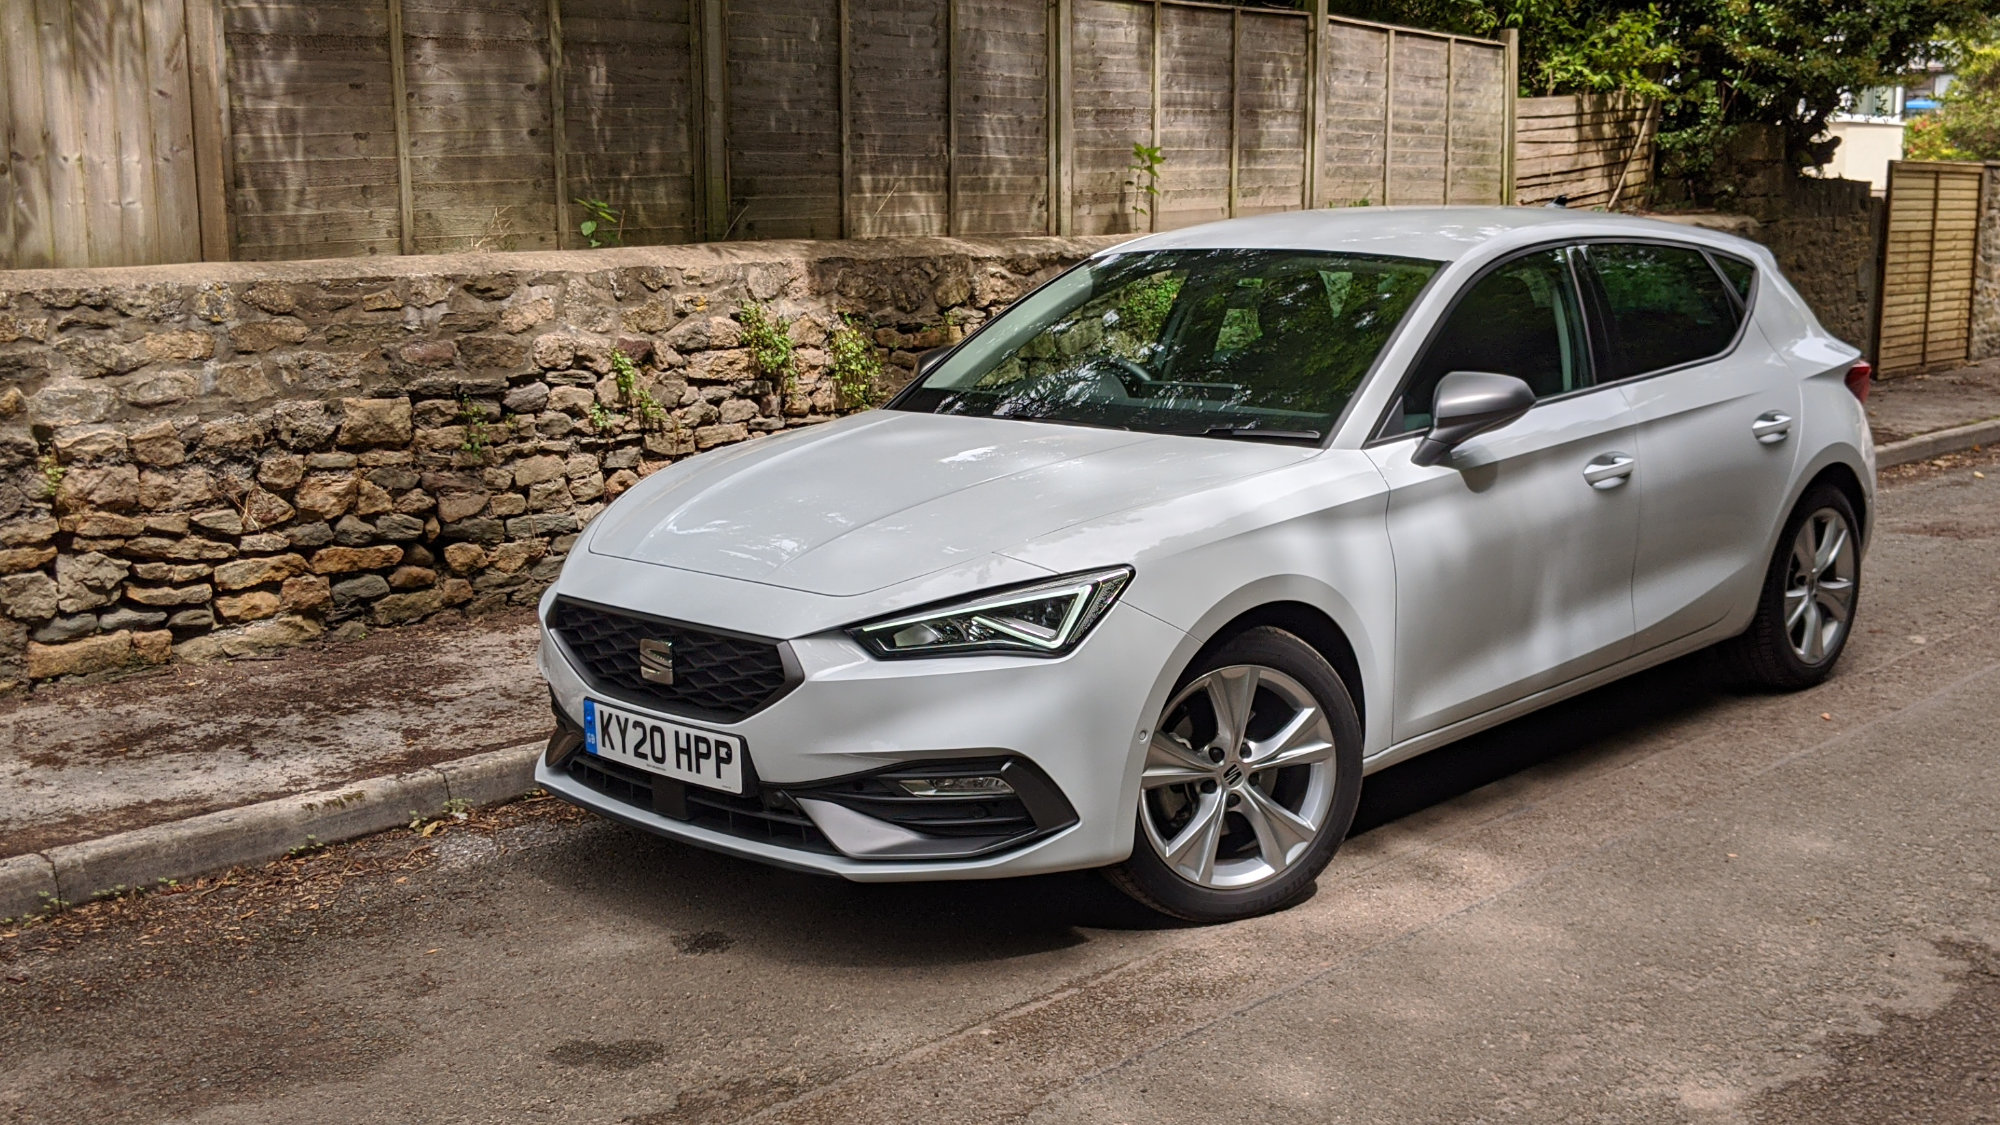 Used SEAT Leon (Mk4, 2020-date) review